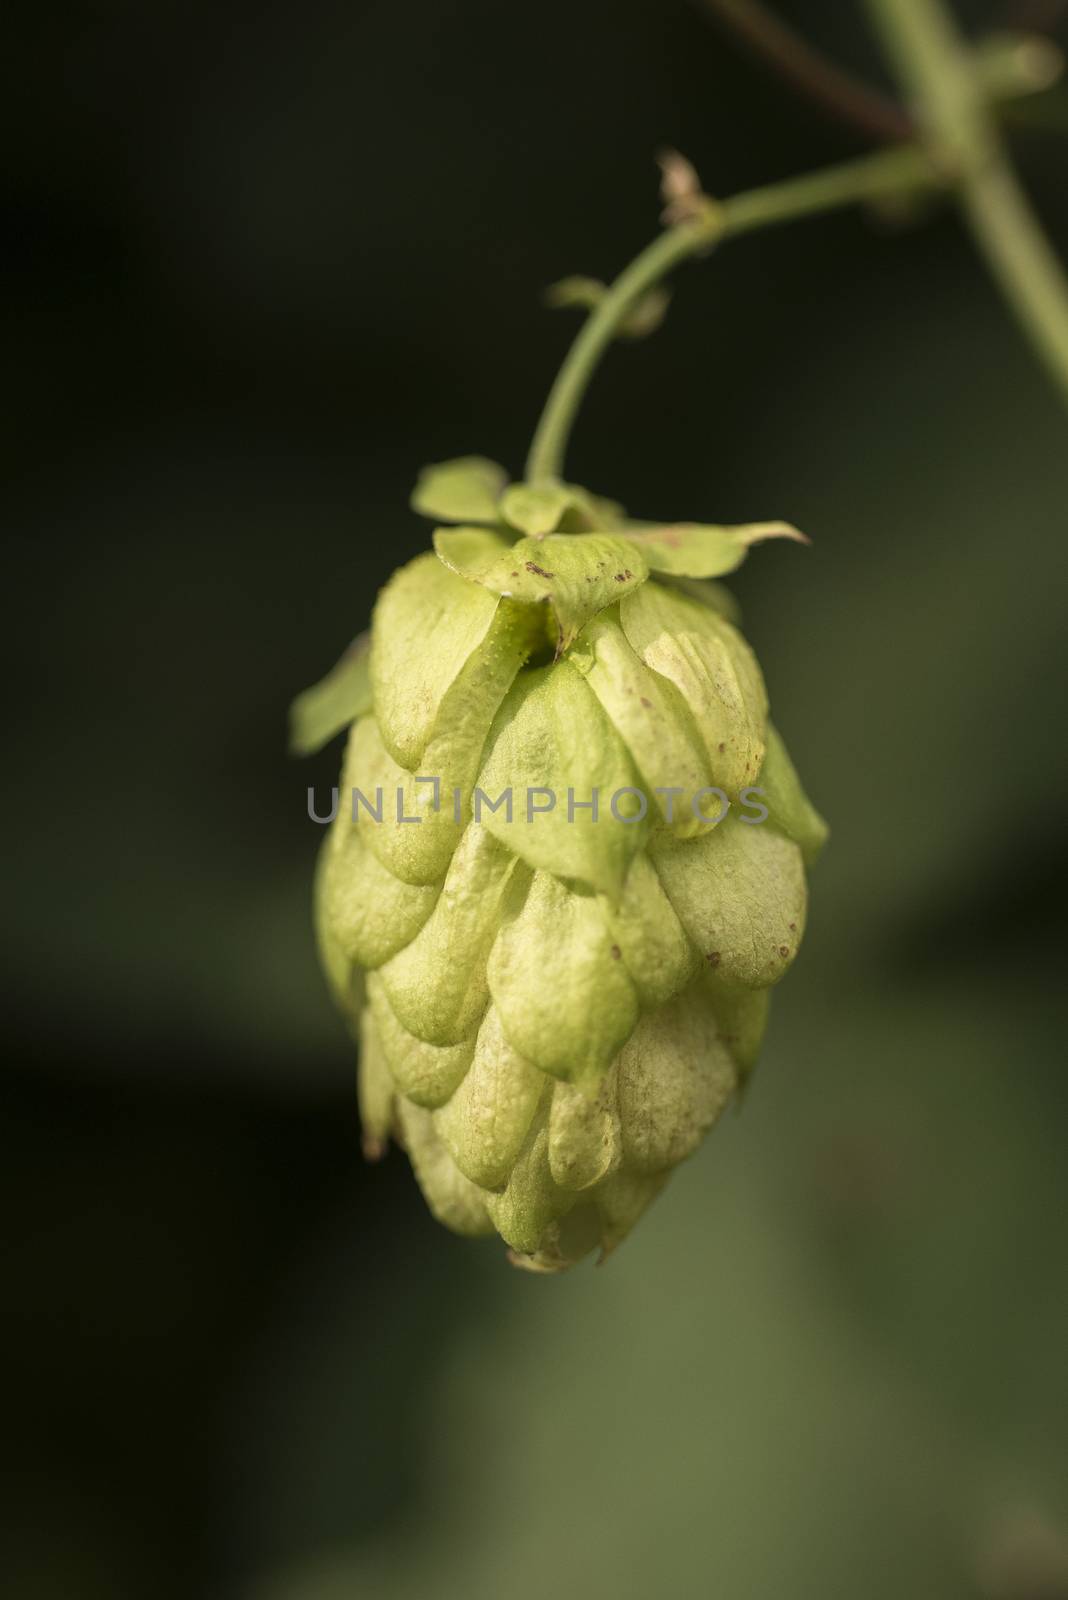 Cones of common hop (Humulus lupulus). anxiety, insomnia and oth by jalonsohu@gmail.com